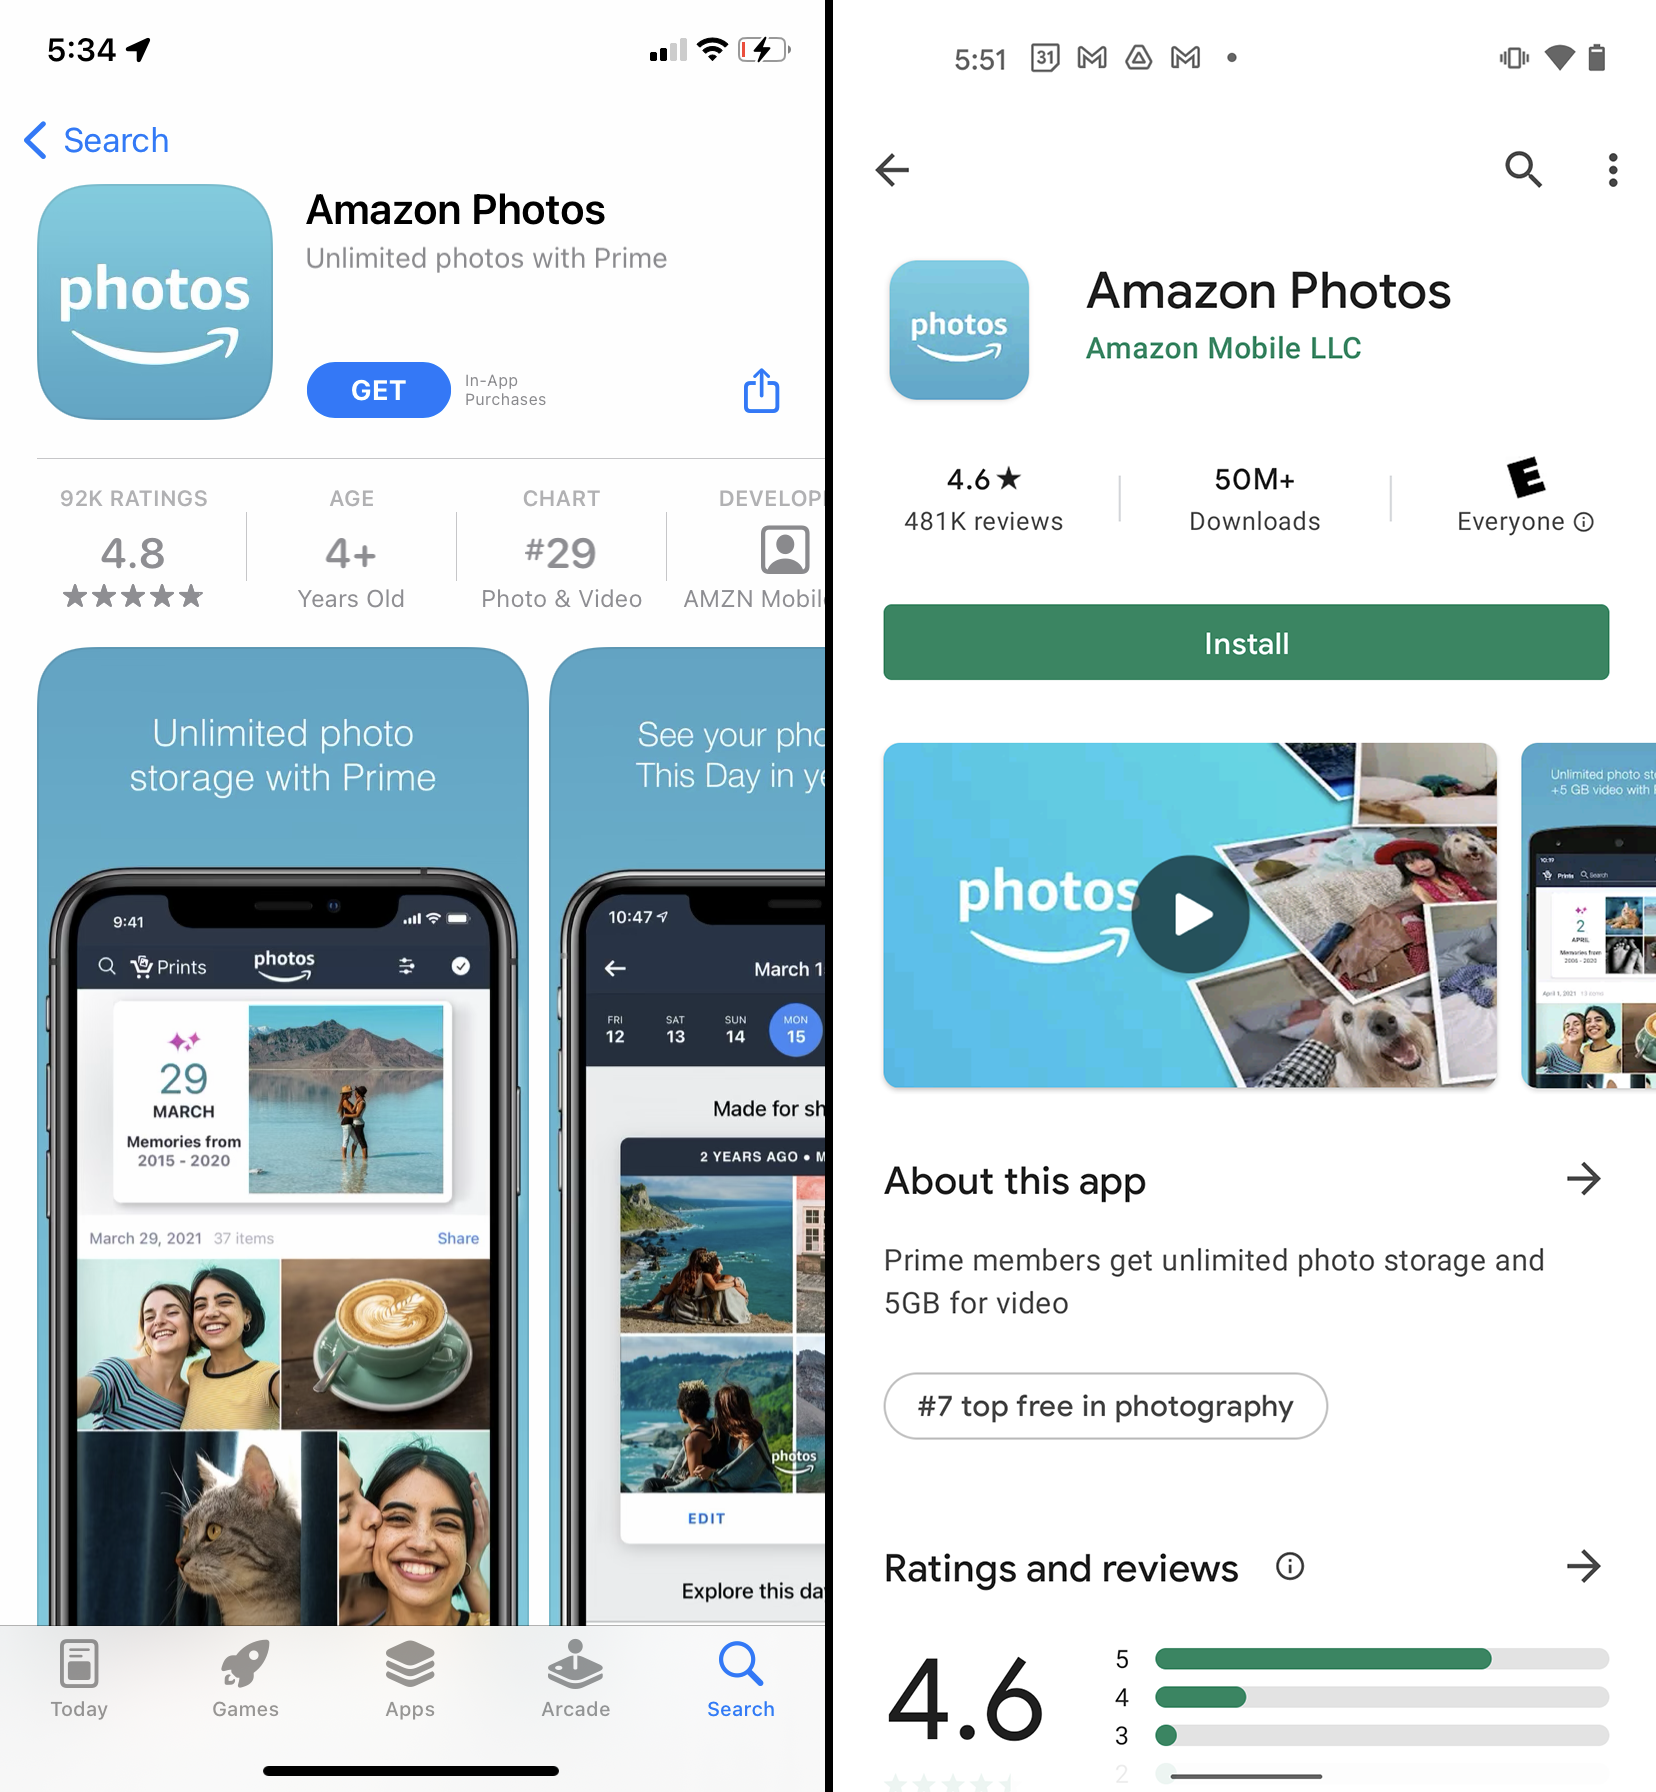 The App Store and Google Play Store pages for the Amazon Photos app.